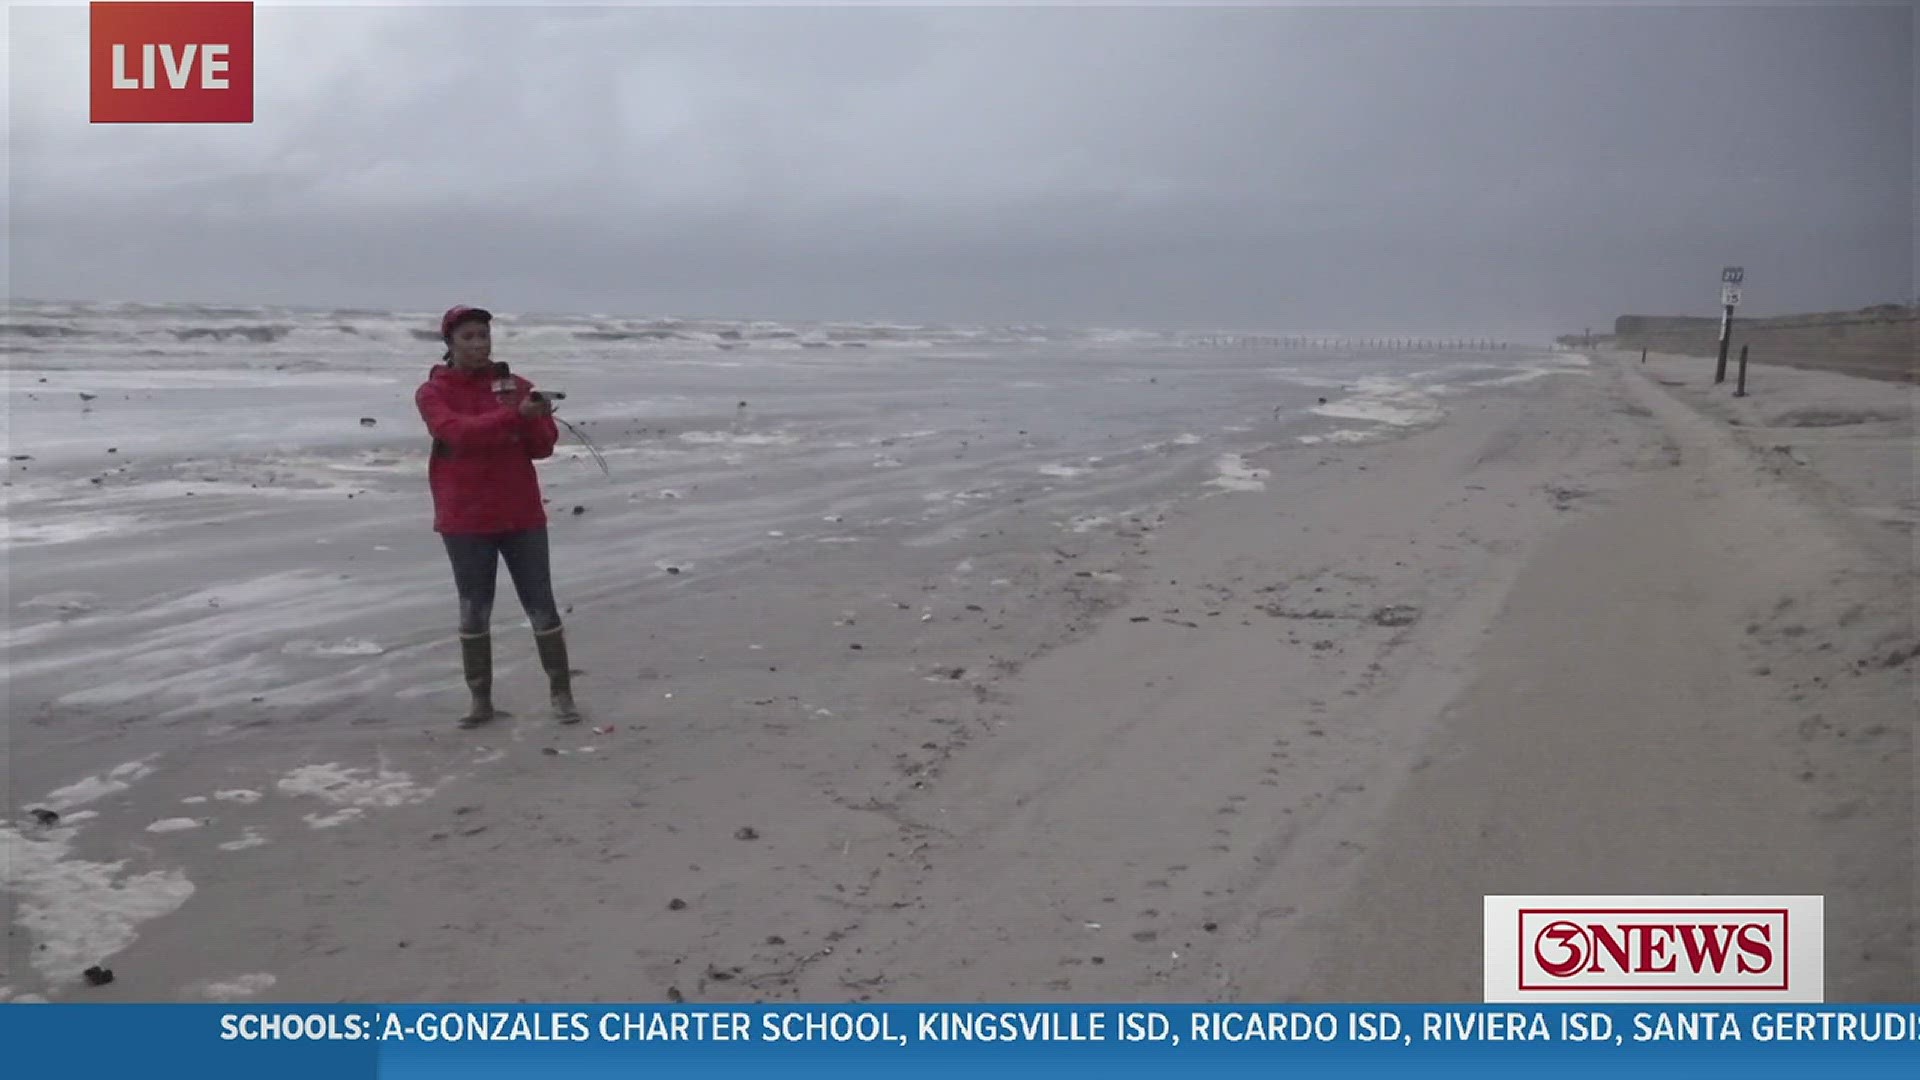 Conditions are deteriorating on Padre Island beaches.